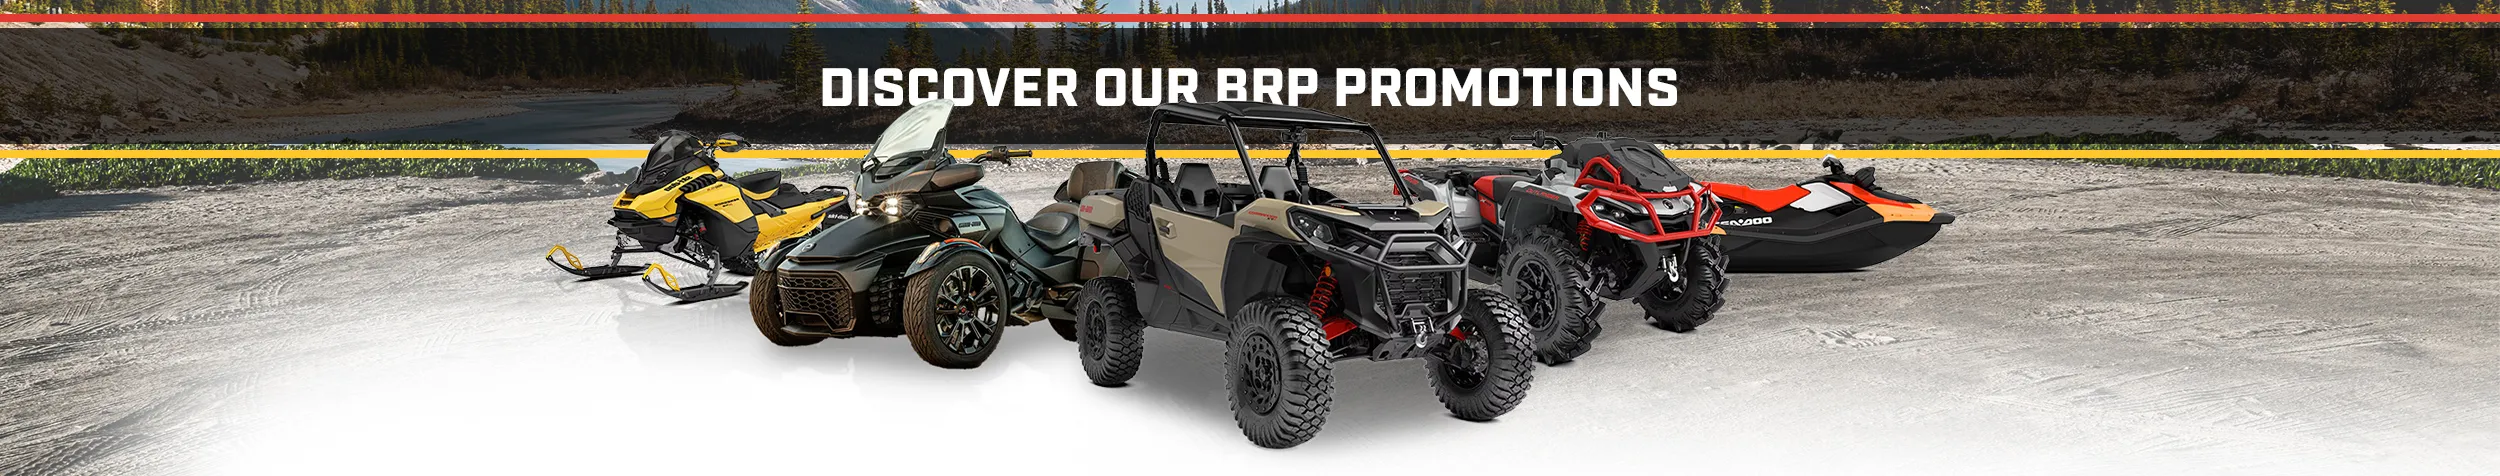 Discover our BRP promotions